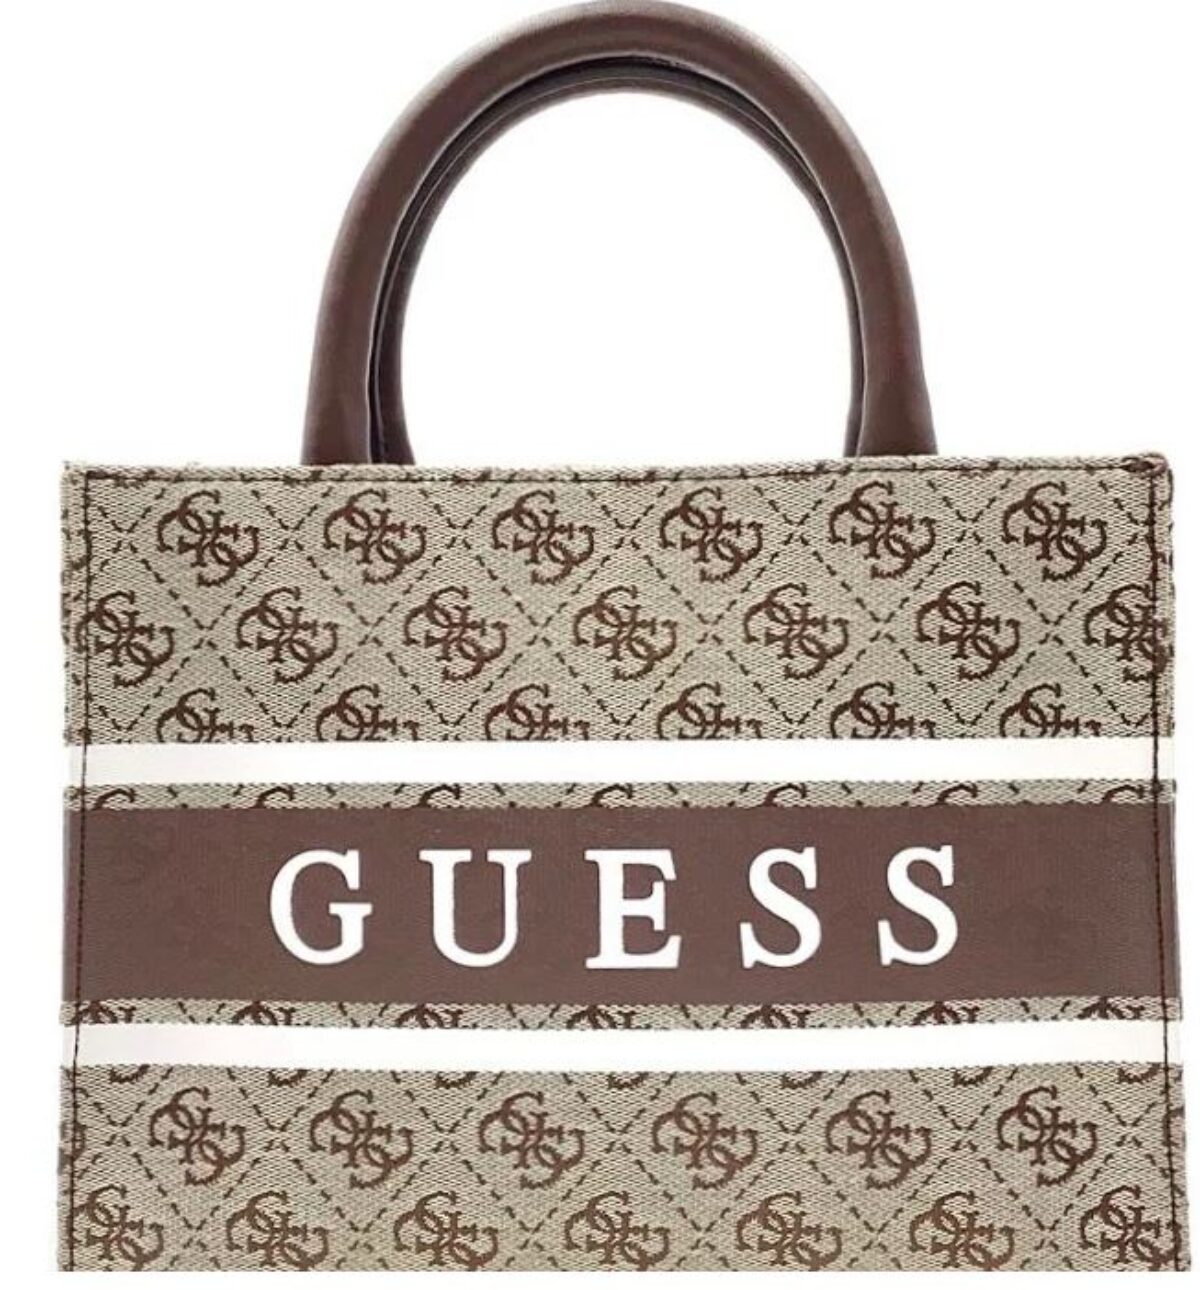 GUESS guess ゲス バッグ バック 公式 正規品 モノグラム ブラウン